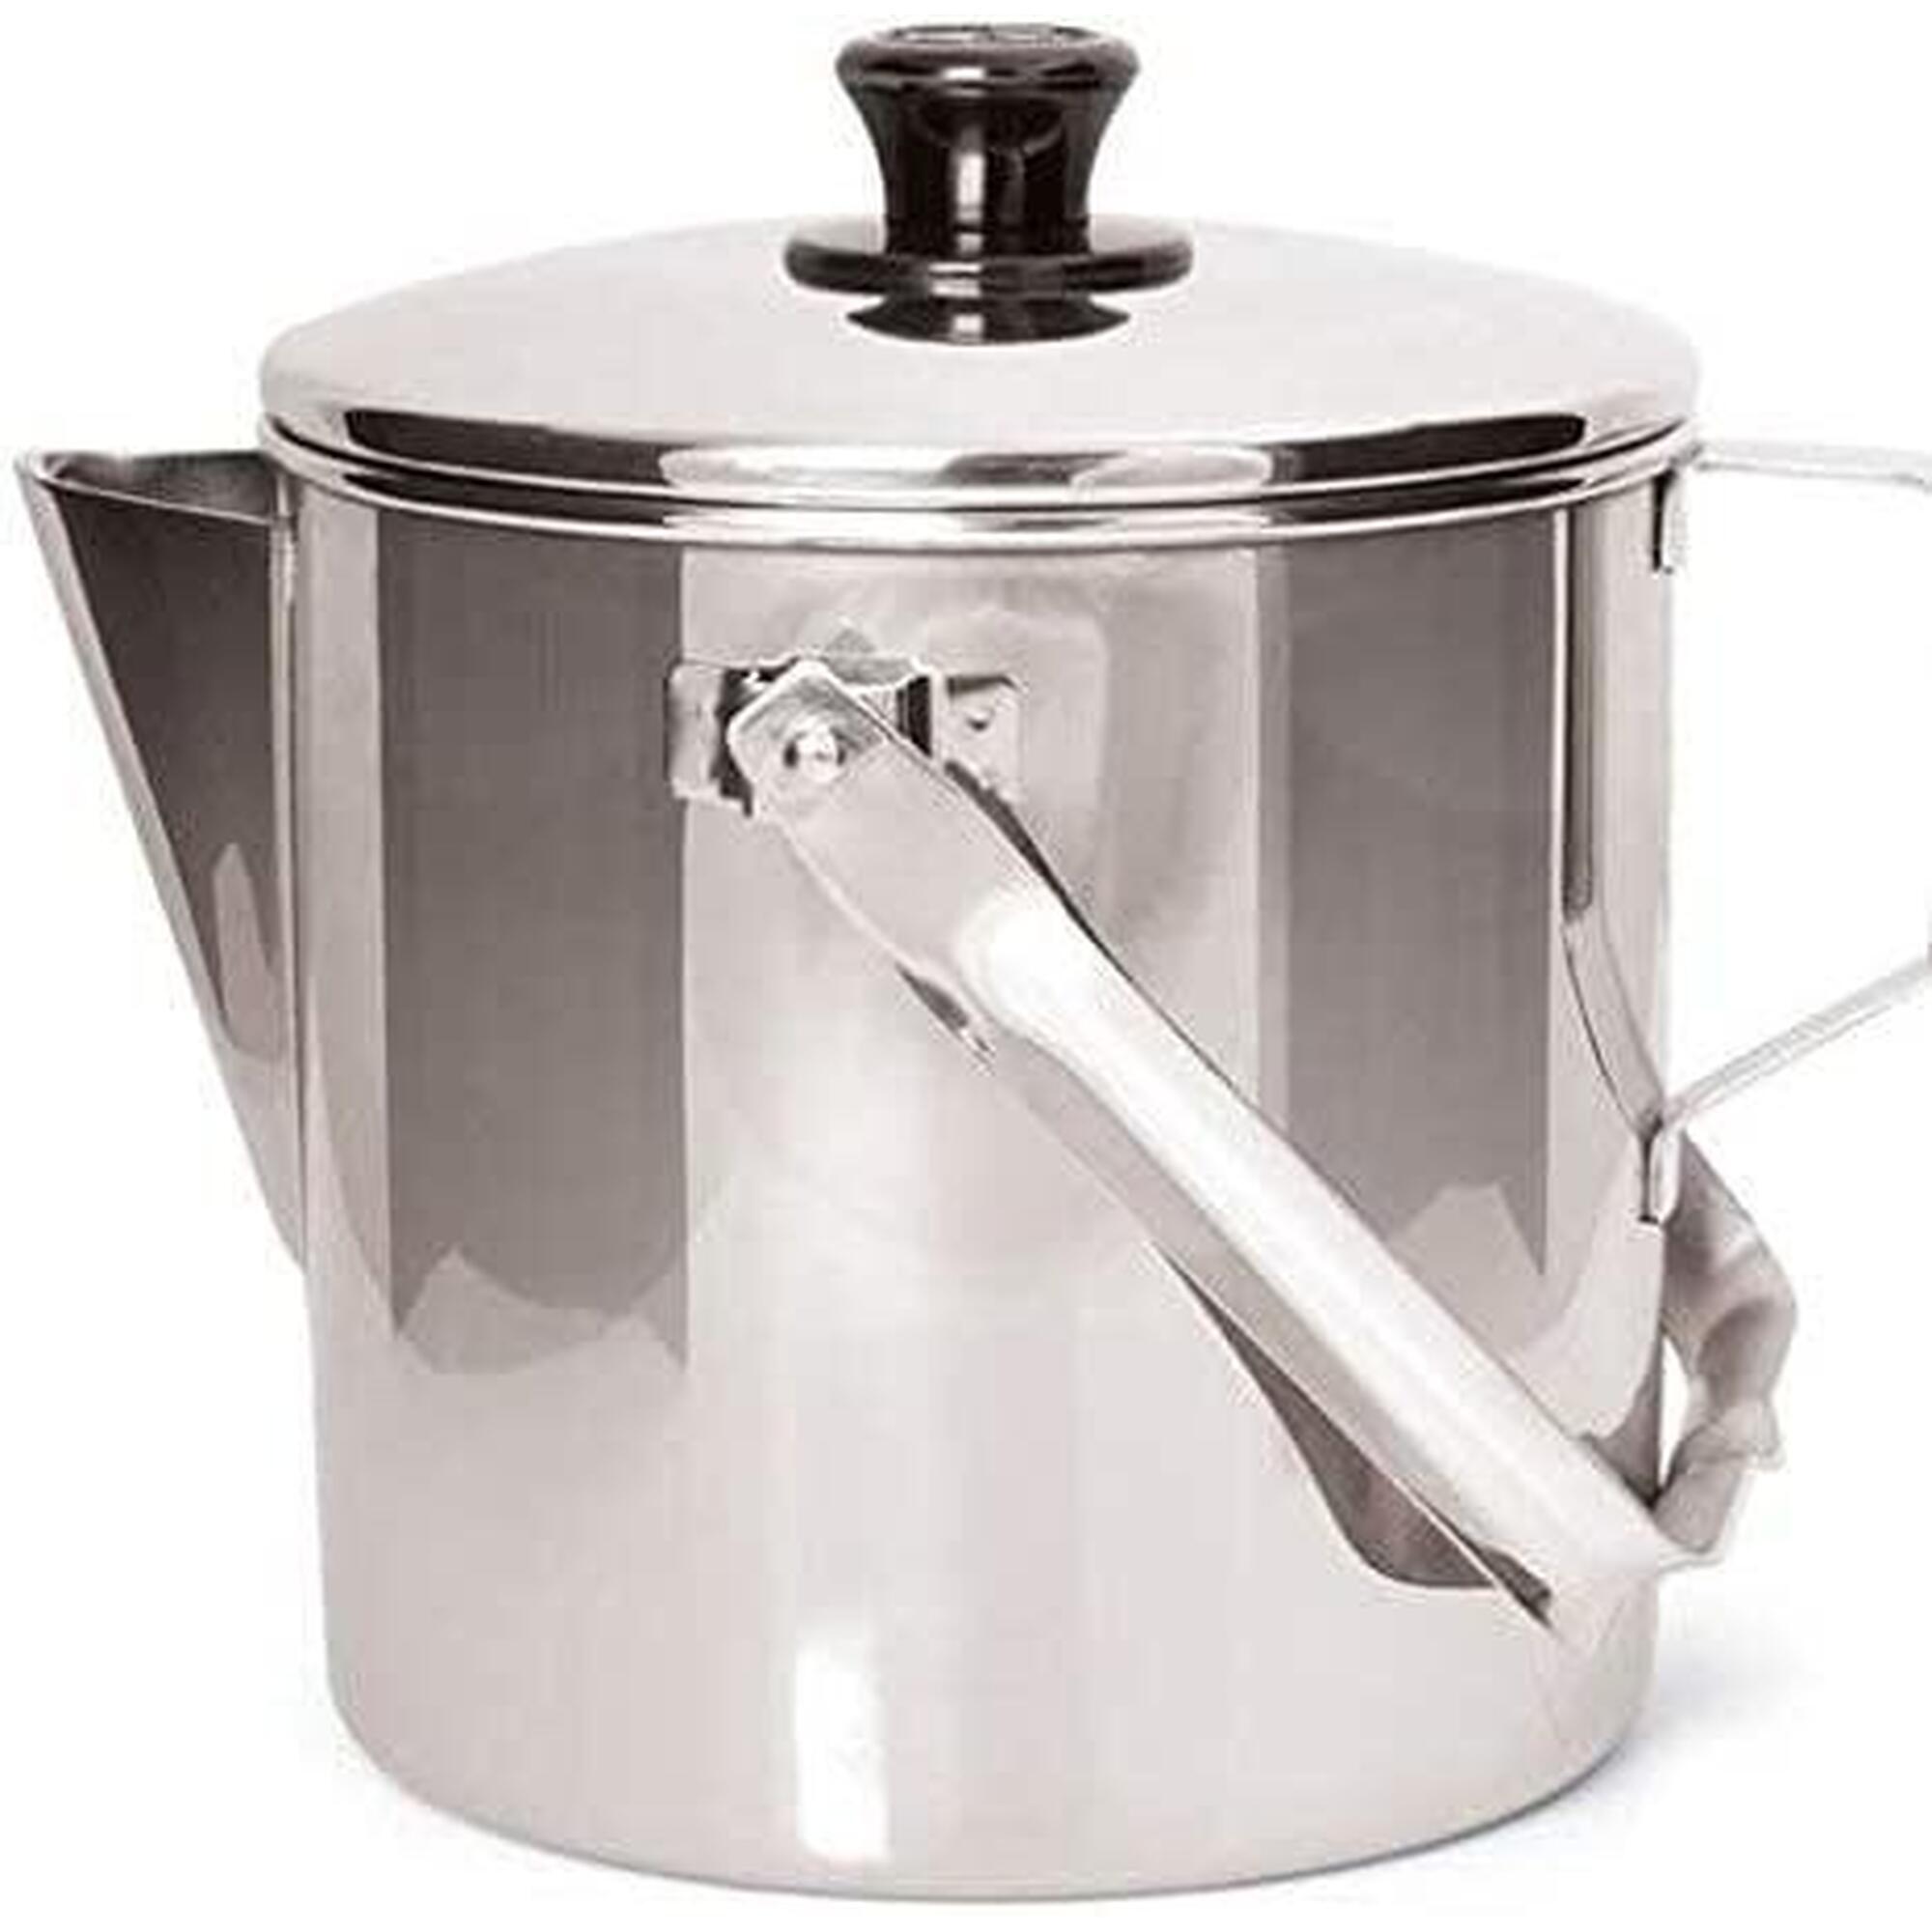 Zebra Billy Can Kettle 2.0 Litres